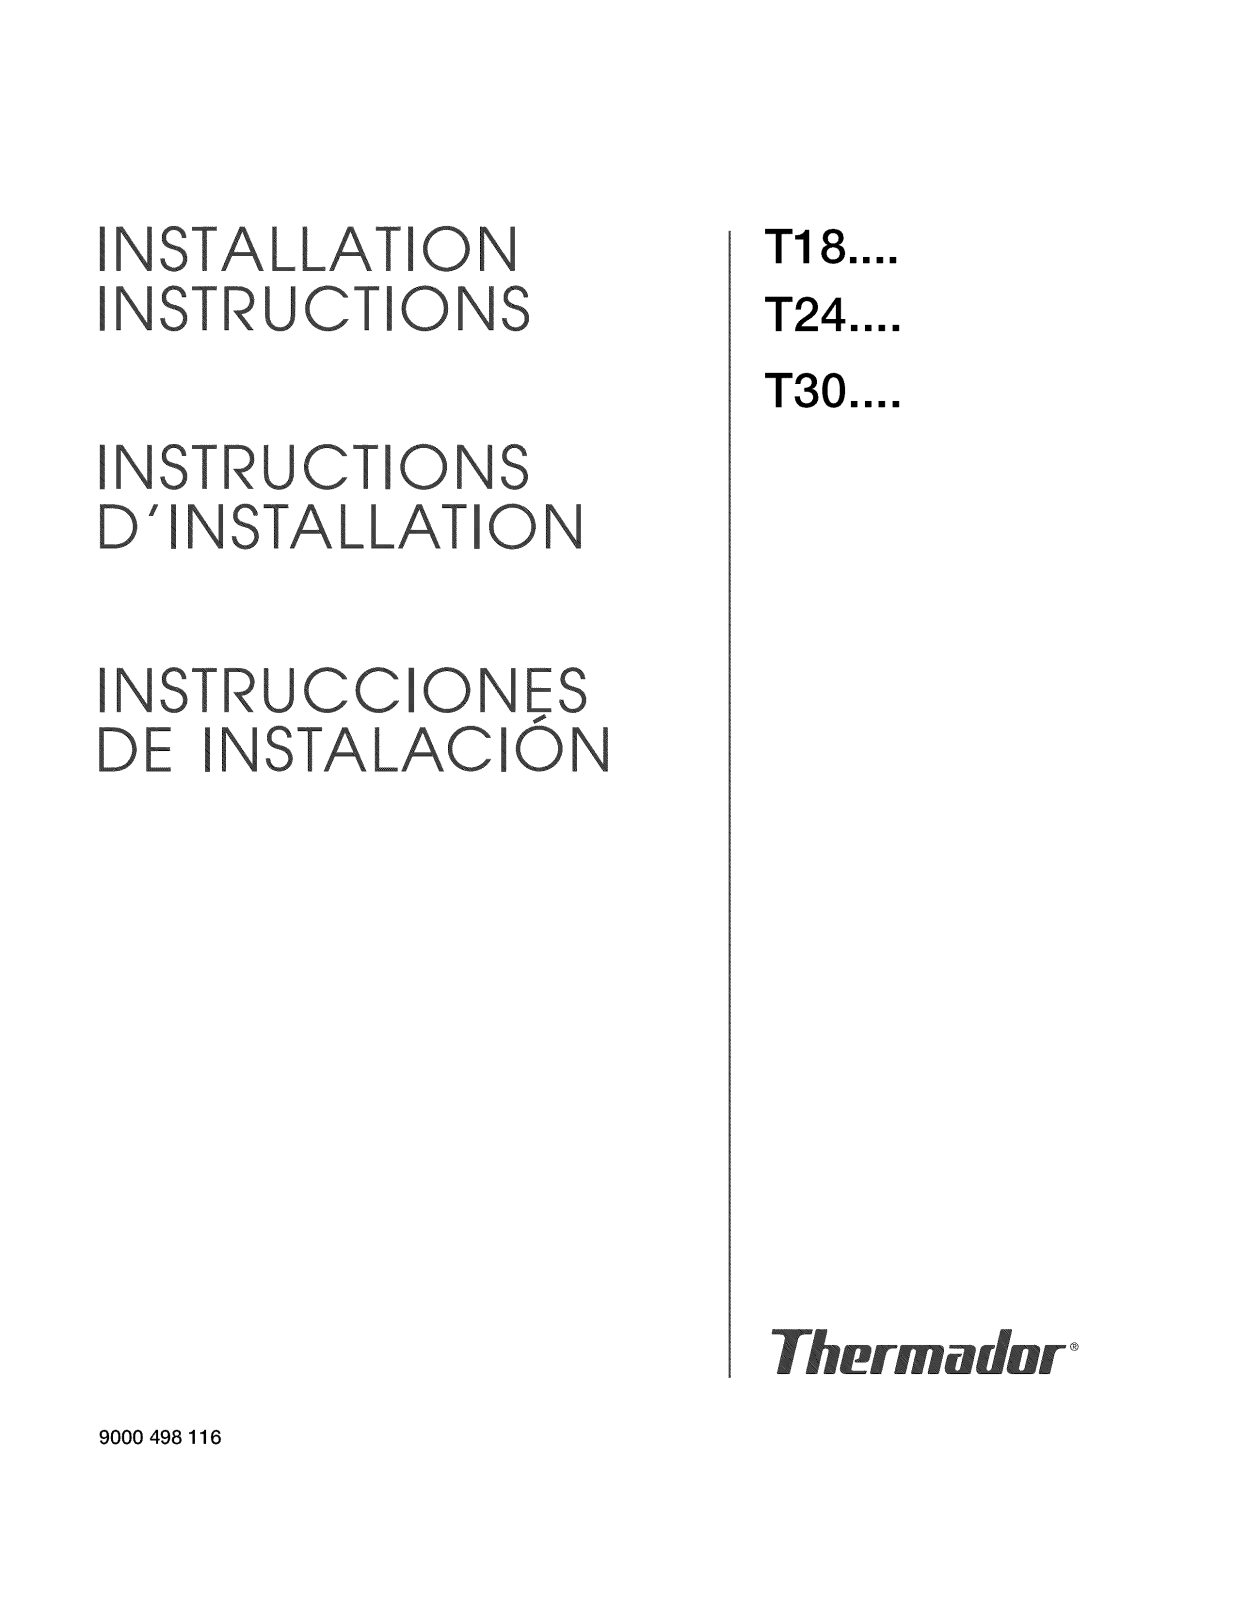 Thermador T24ID80NLP/39, T24ID80NRP/32, T18ID80NLP/33, T18ID80NRP/42, T24IF70NSP/41 Installation Guide